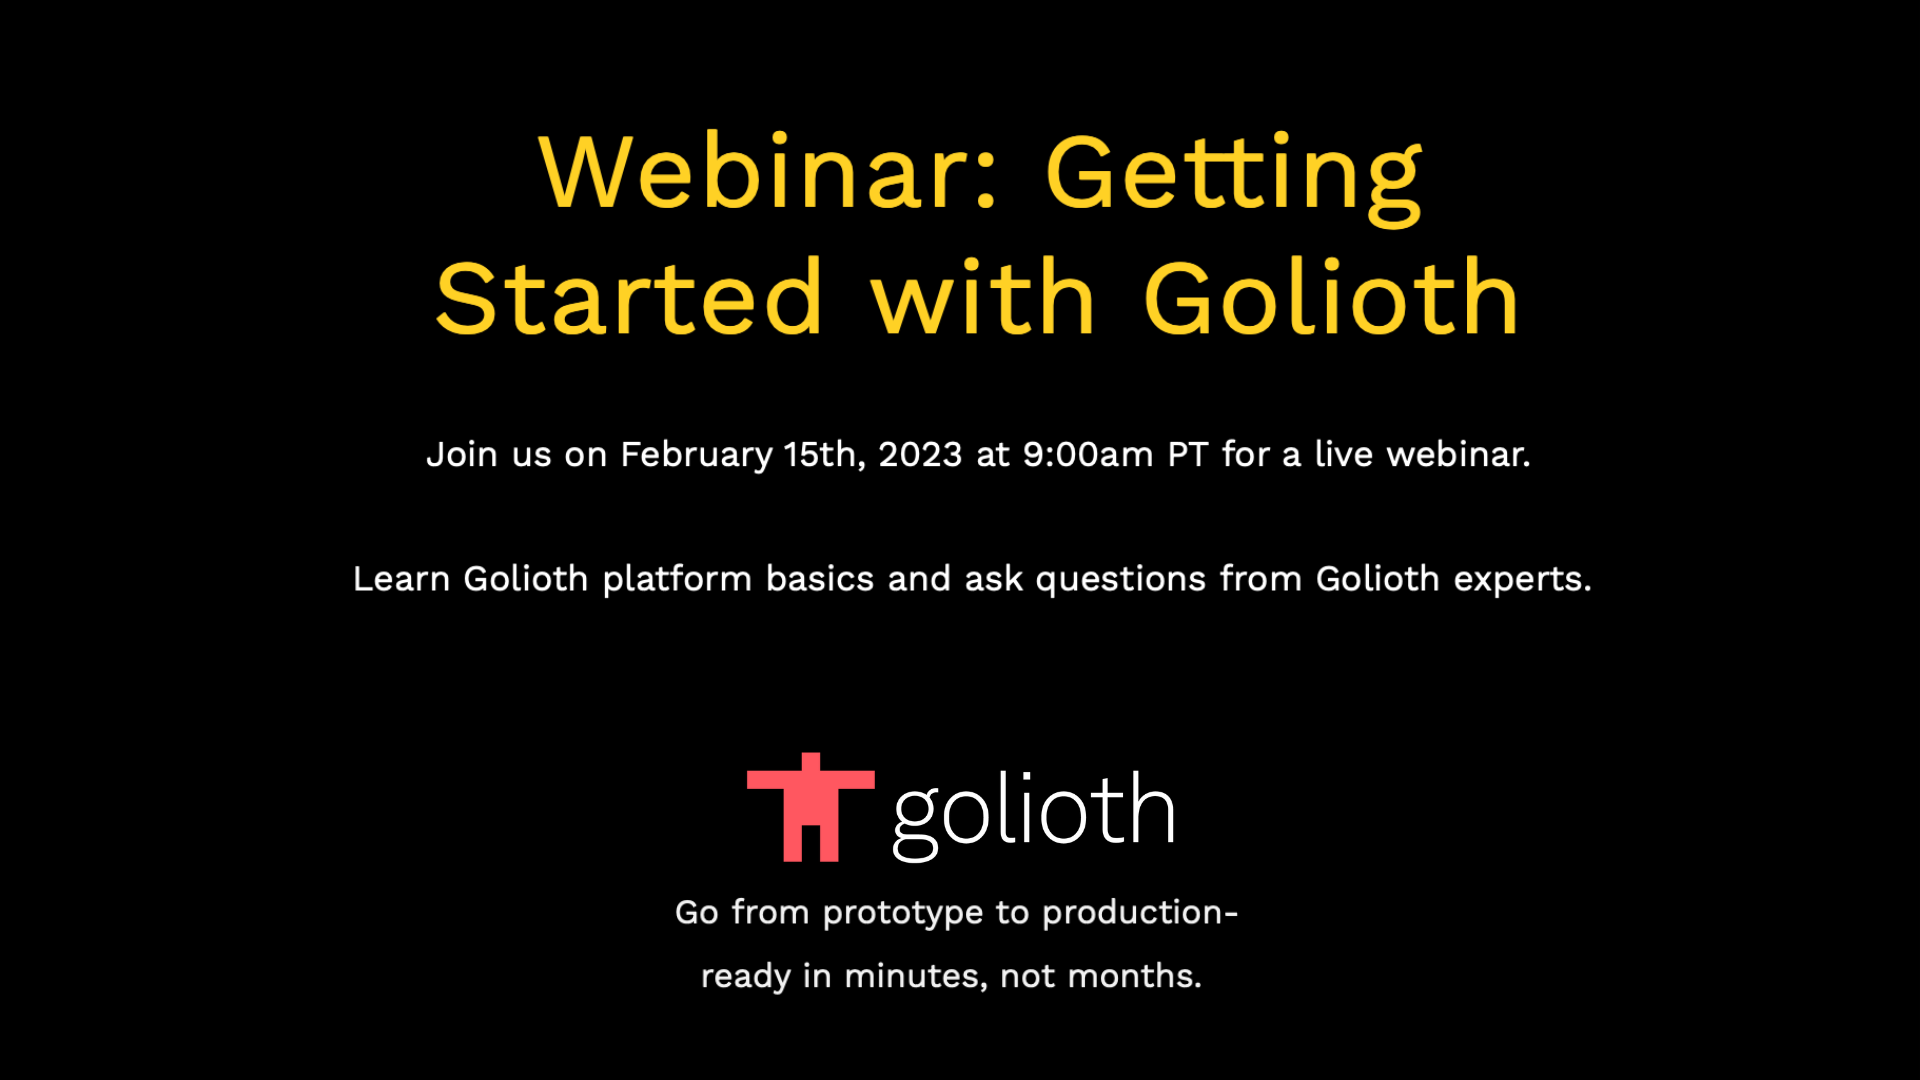 Webinar: Getting Started with Golioth